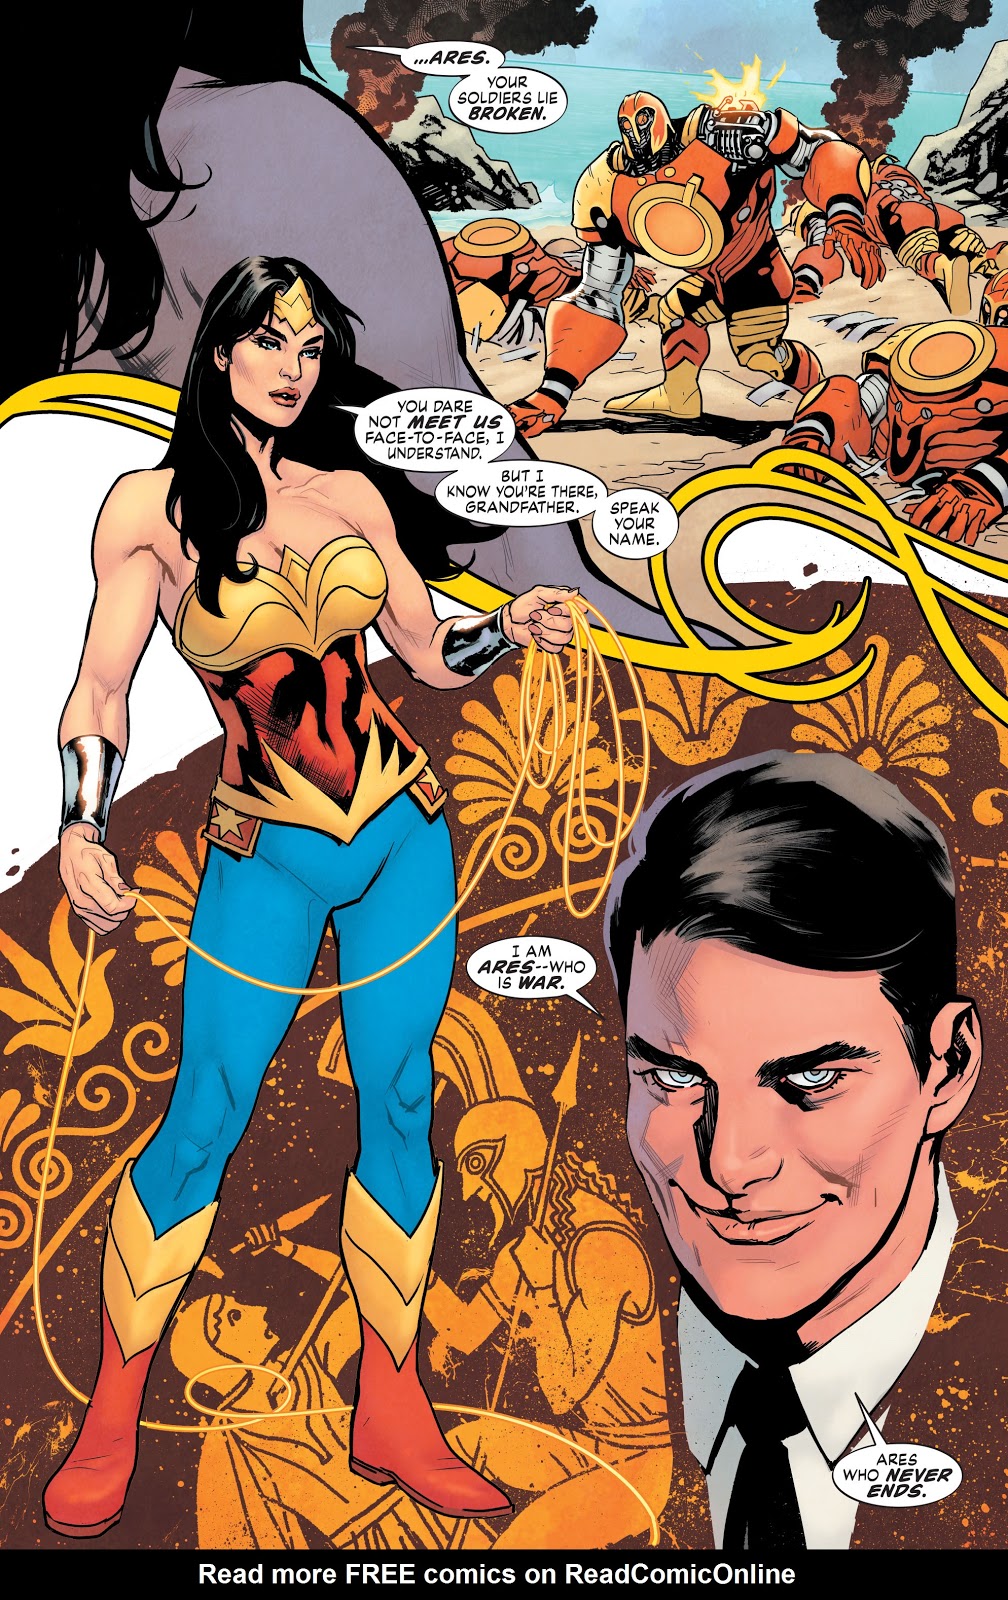 Wonder Woman VS ARES Mark 1 (Earth One) – Comicnewbies